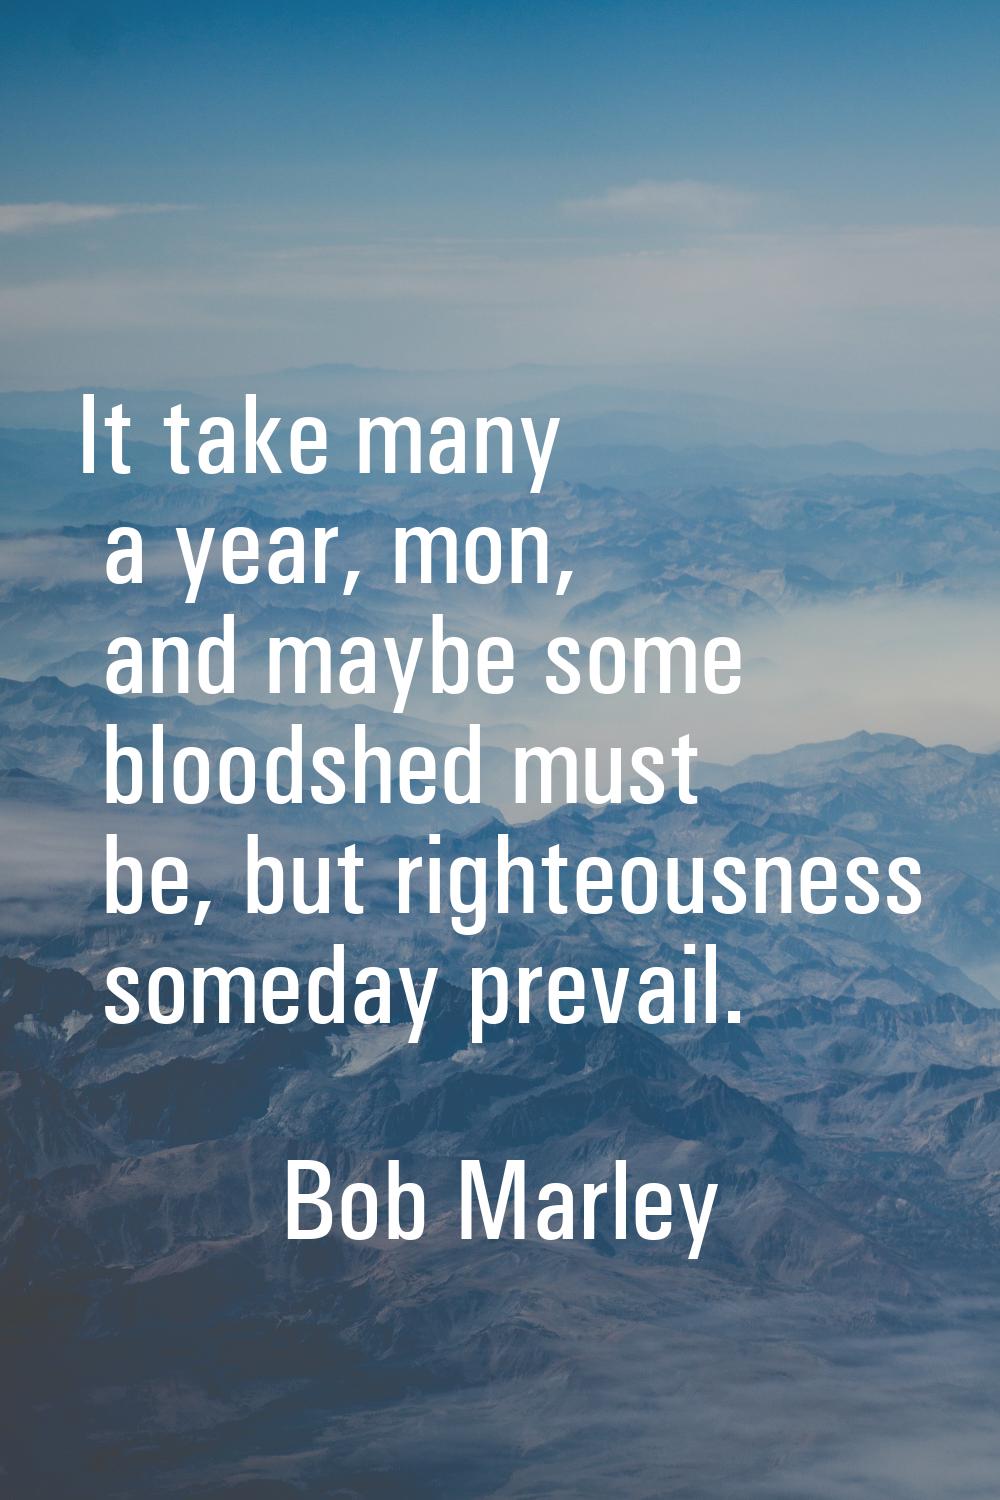 It take many a year, mon, and maybe some bloodshed must be, but righteousness someday prevail.